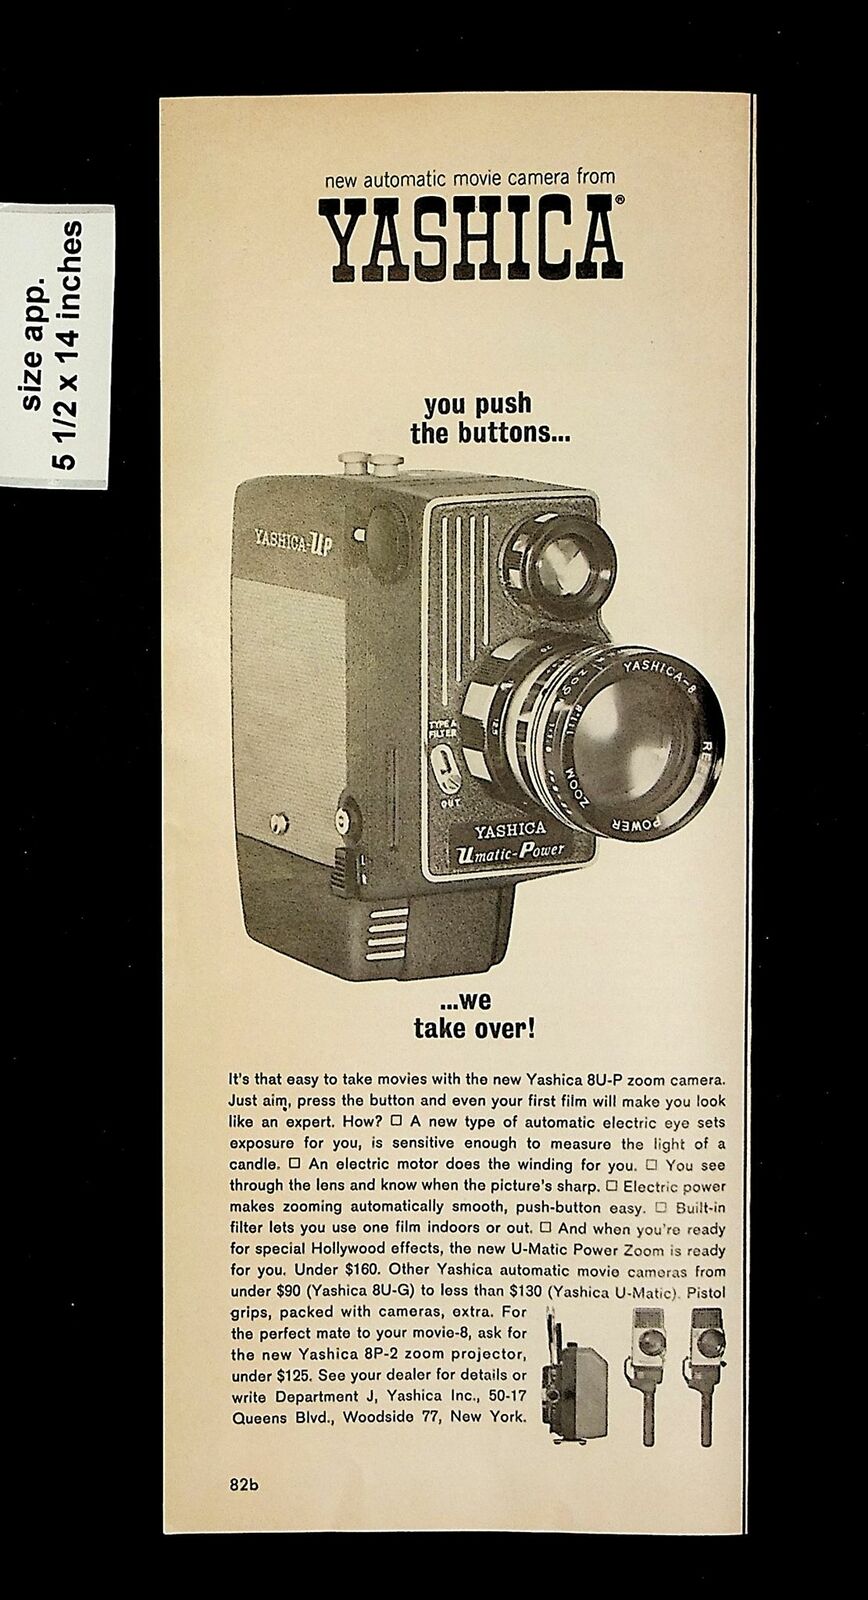 1963 Yashica Camera Push Buttons We Take Over Vintage Print Ad 016287